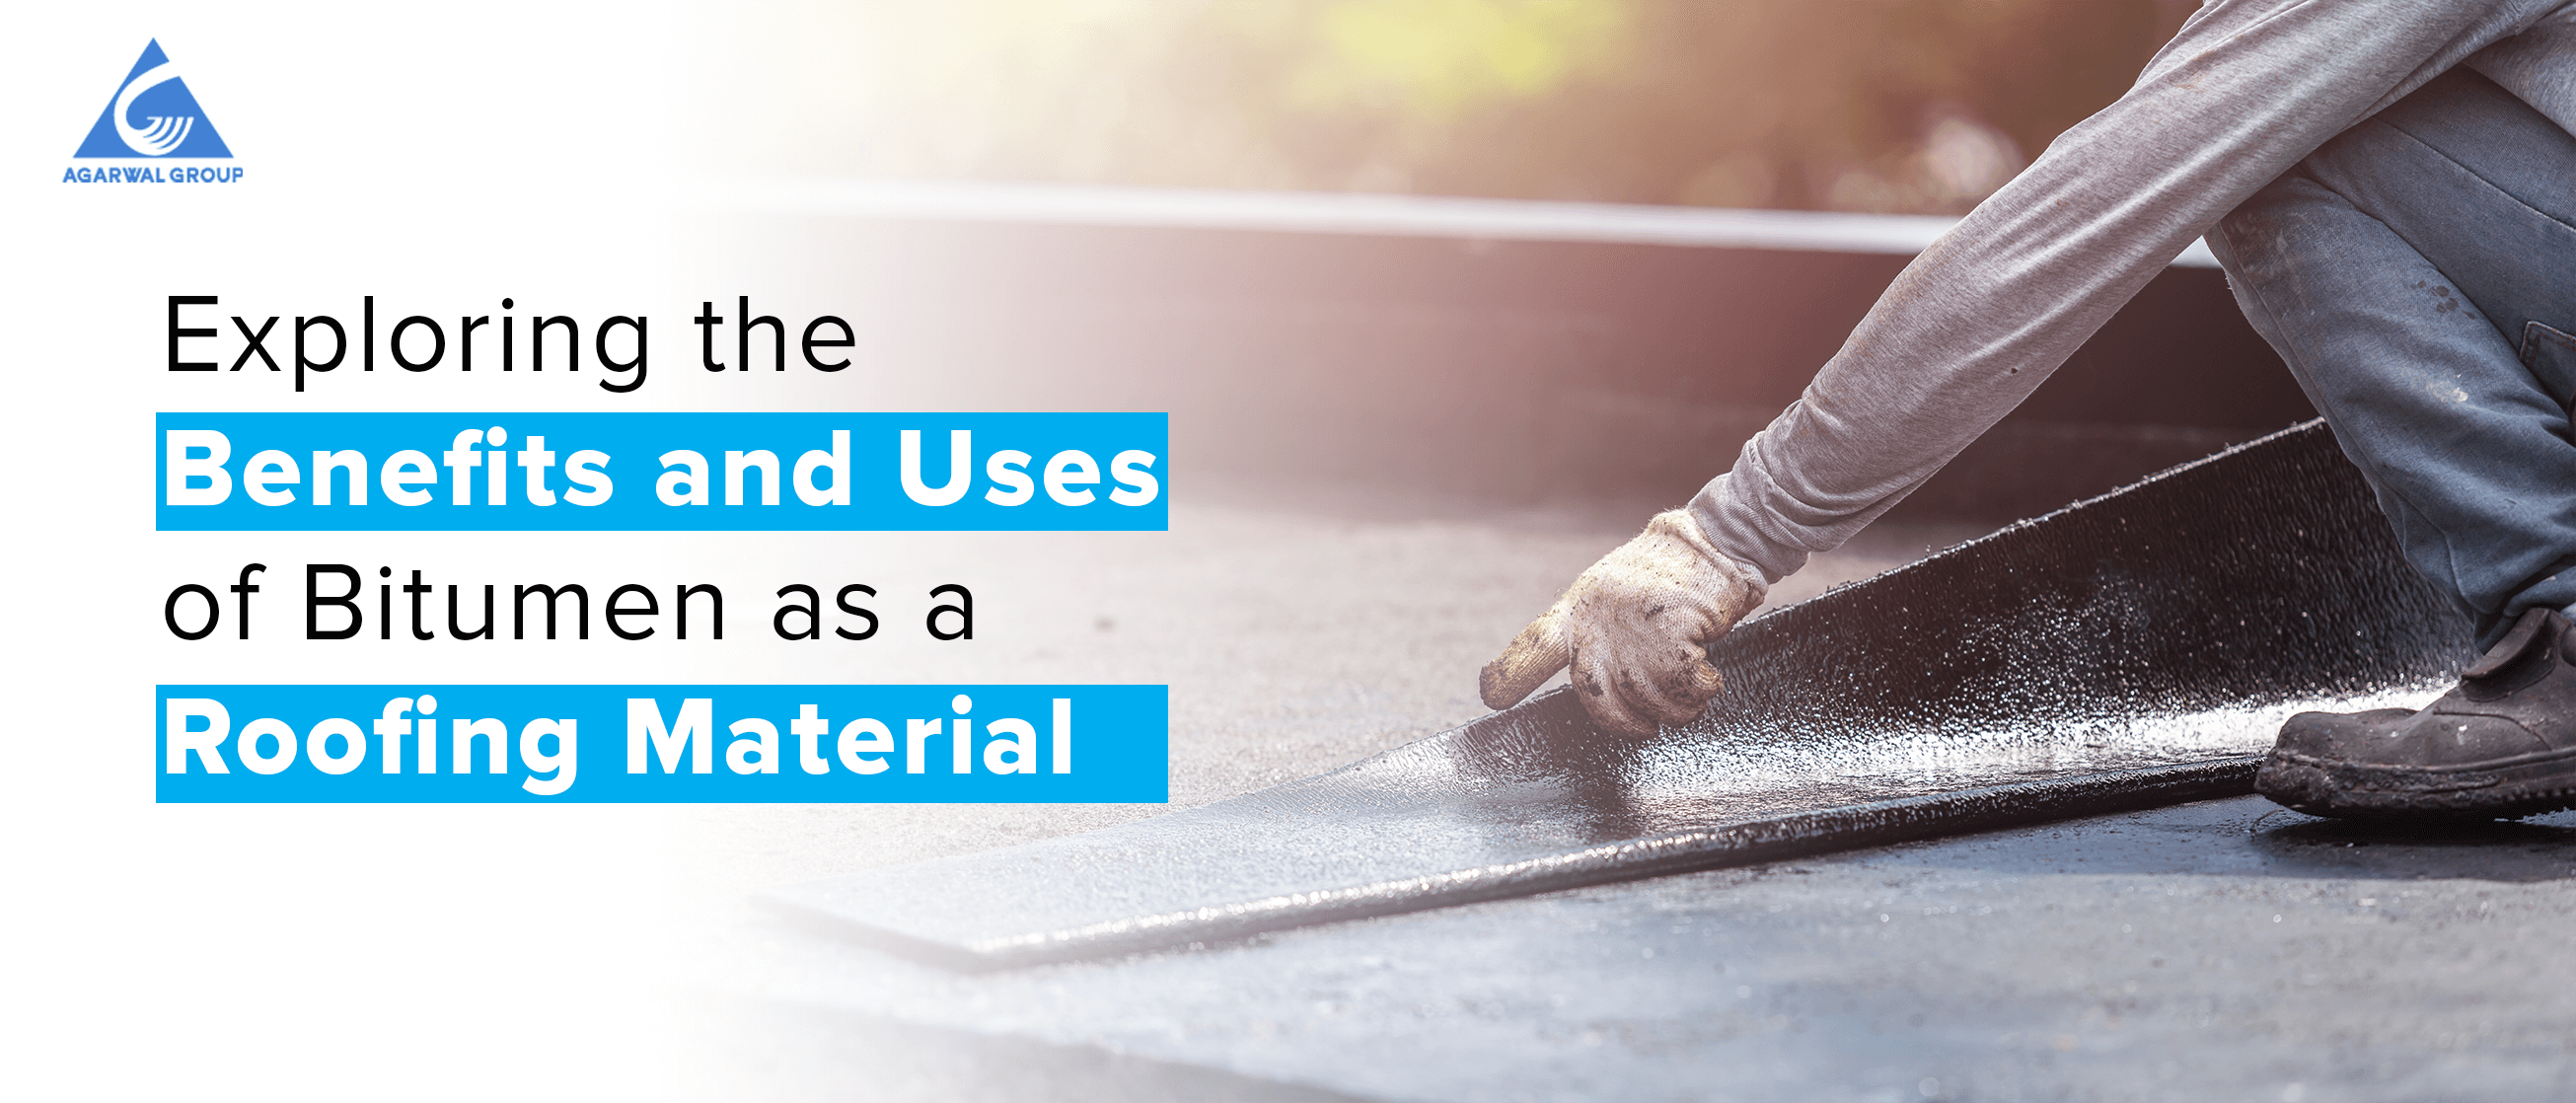 Exploring the Benefits and Uses of Bitumen as a Roofing Material